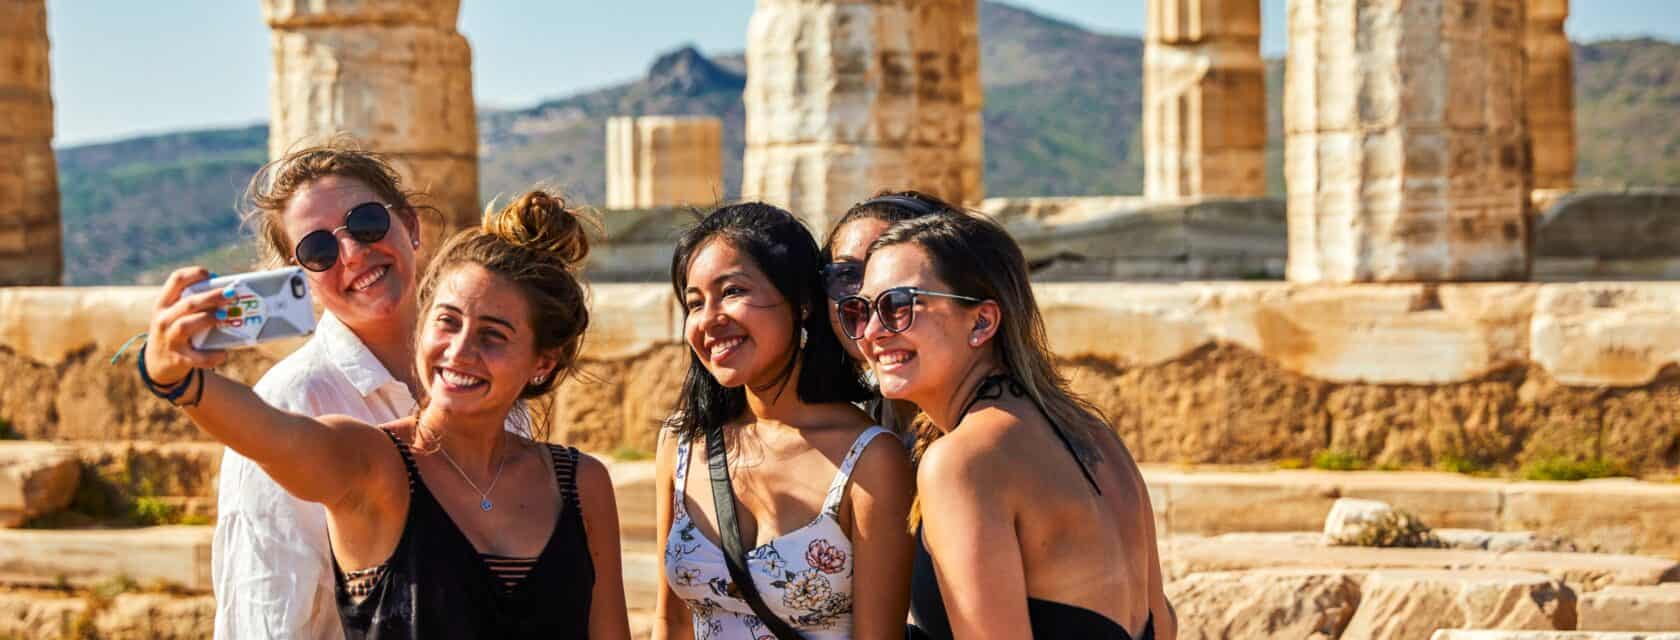 Atlantis students posing for a photo by a Greek historical landmark.